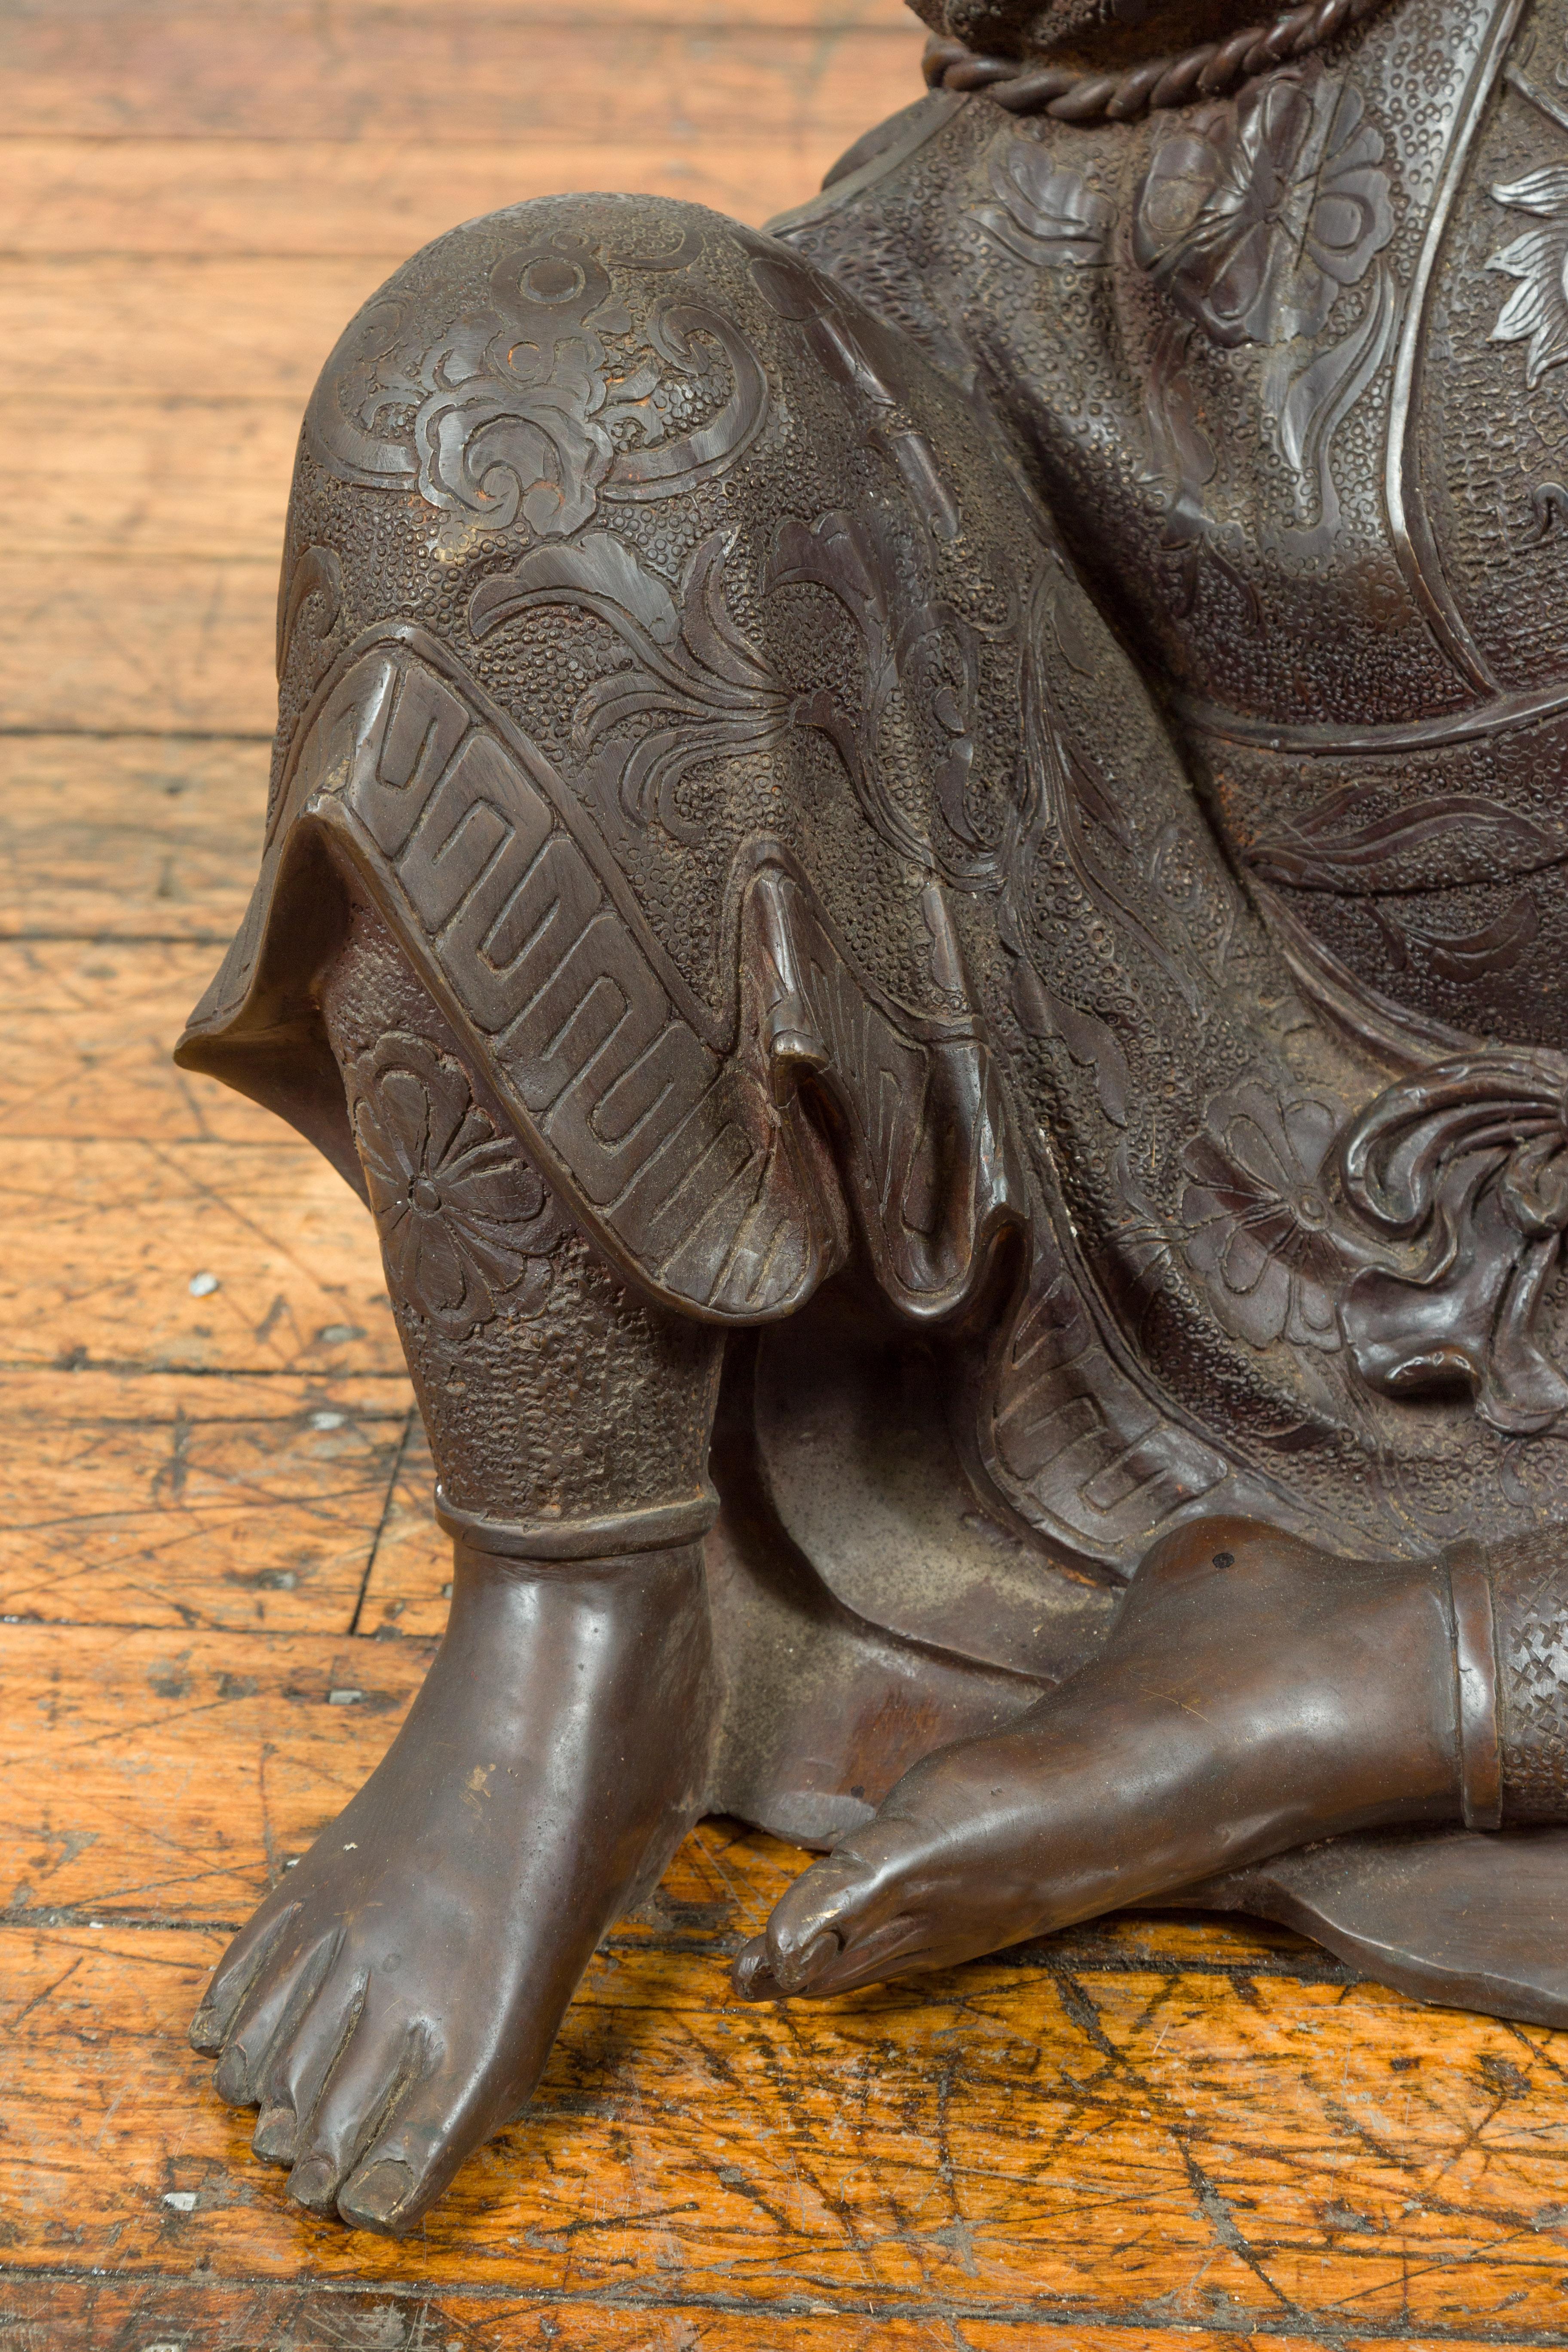 20th Century Japanese Style Bronze Sculpture of a Seated Woman Holding a Mythical Creature